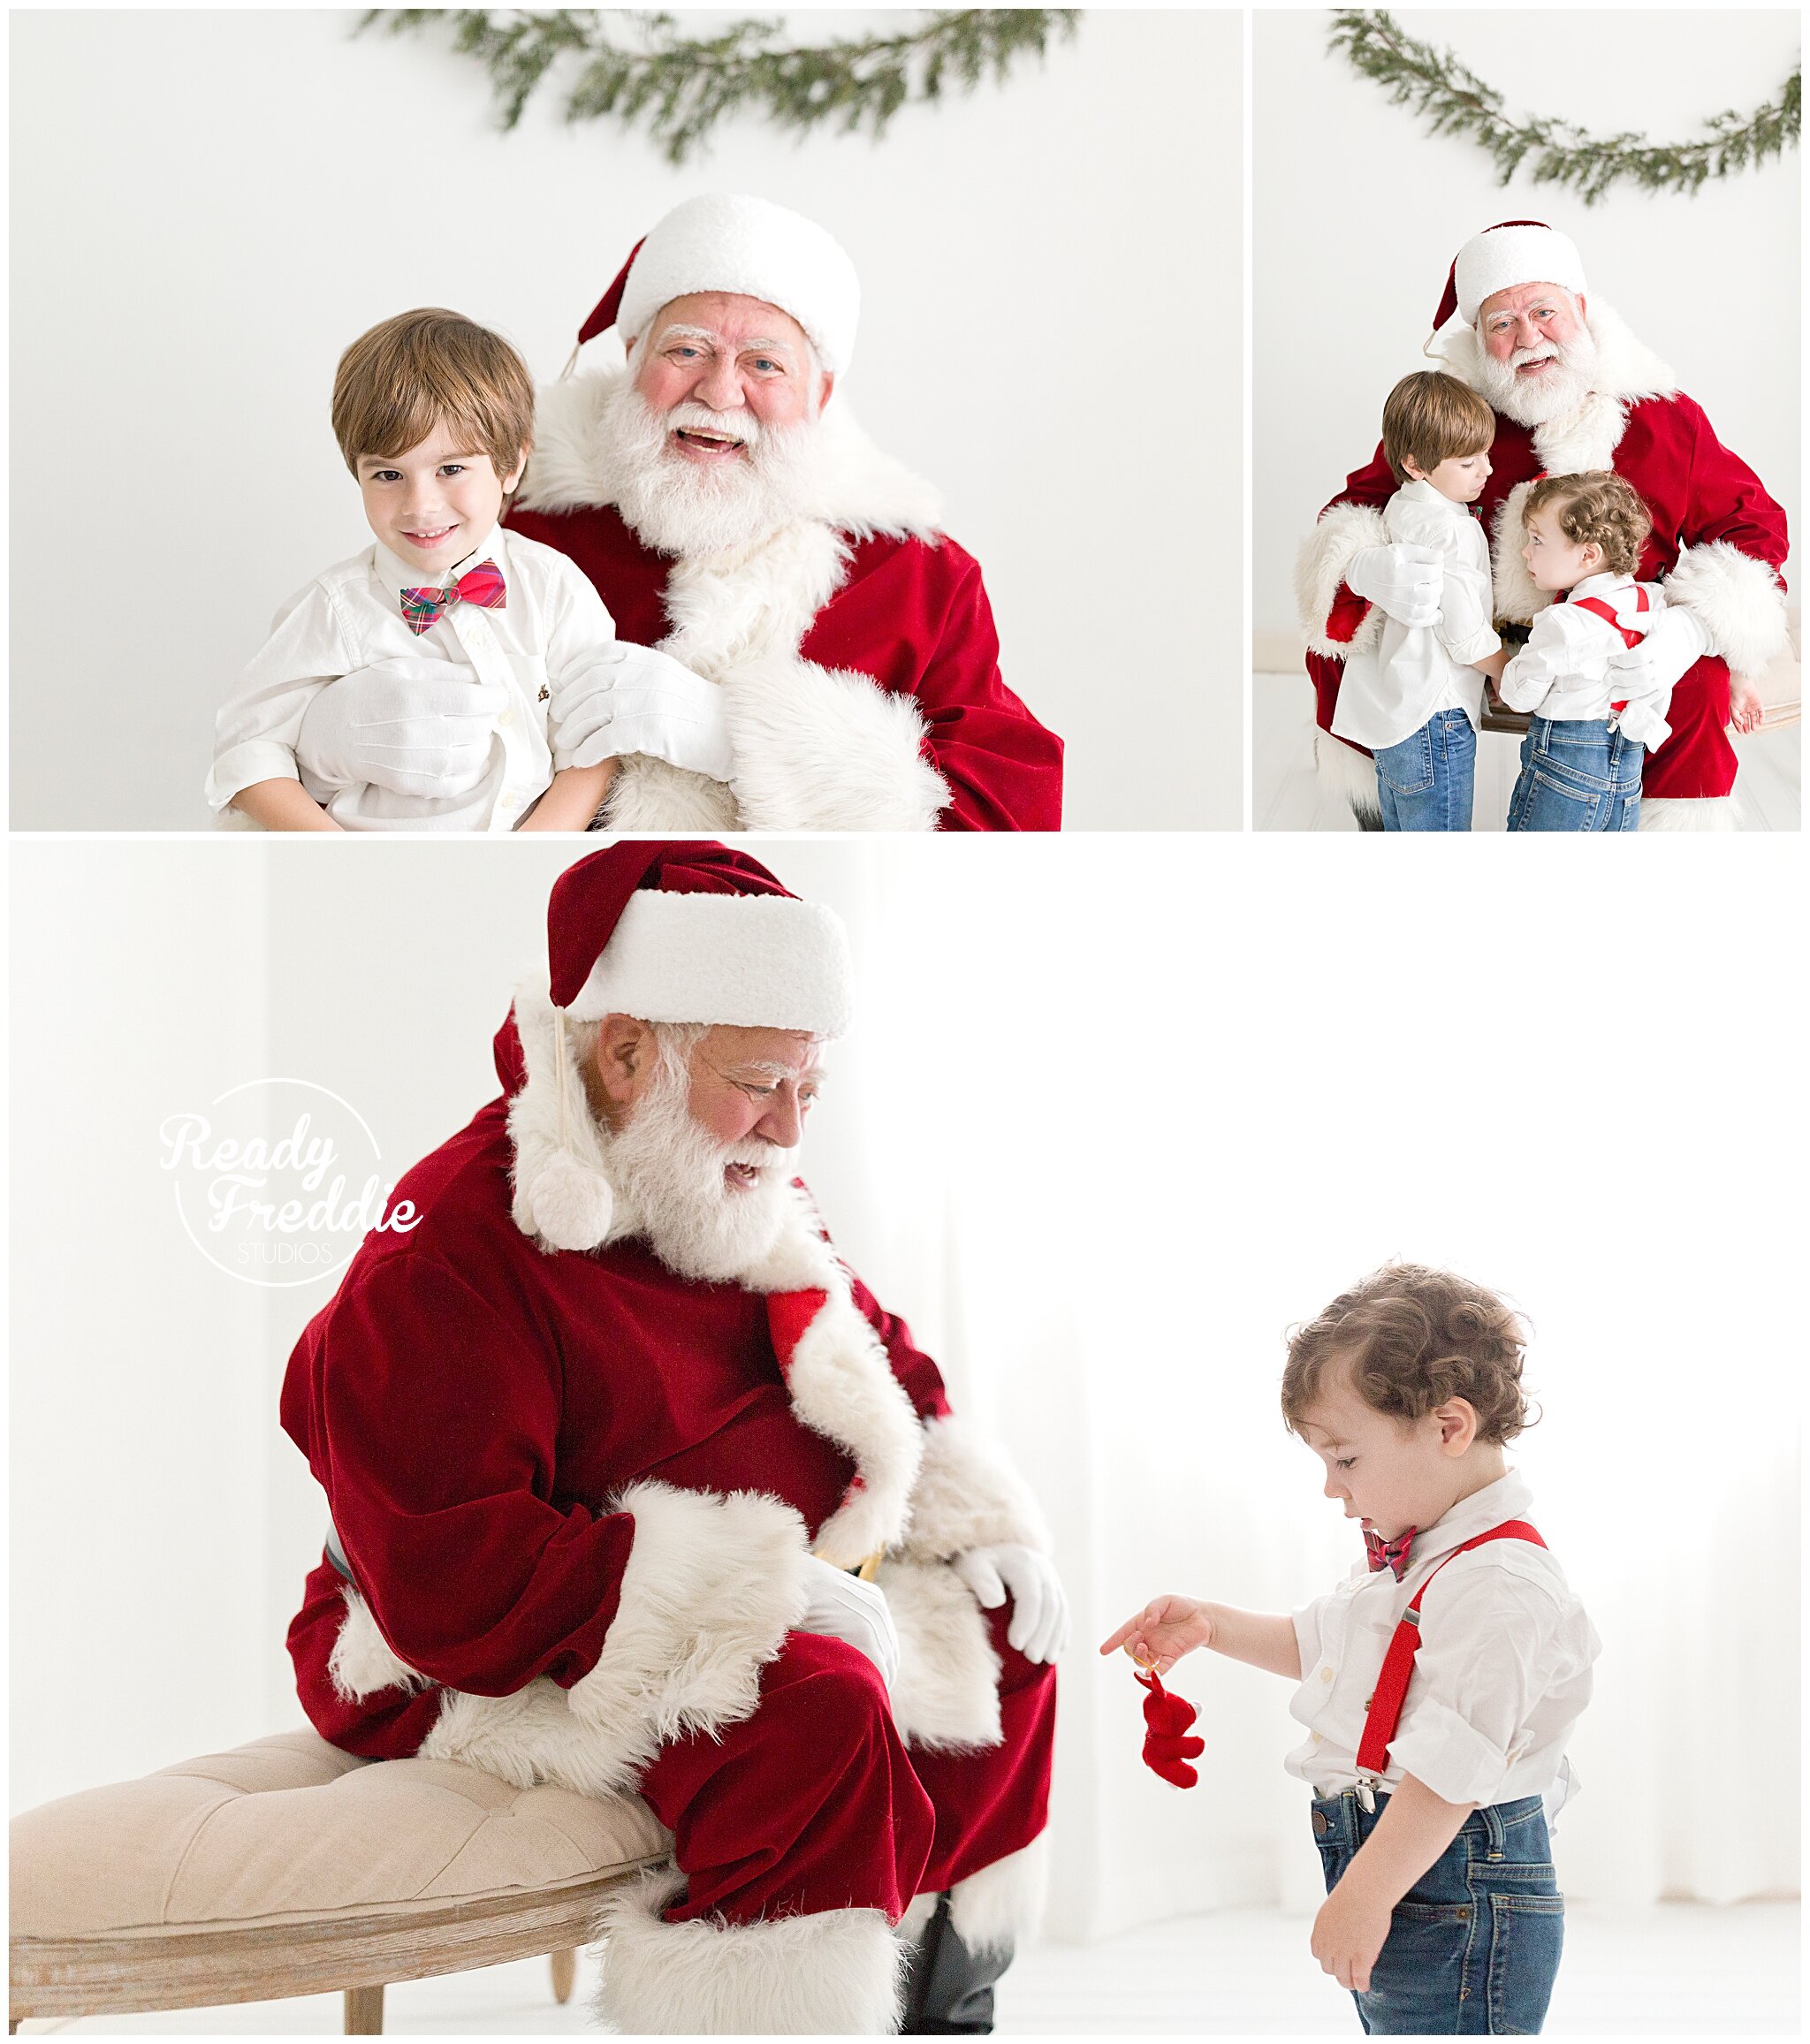 Simple and Sweet Santa pictures with kids | Ready Freddie Studios Miami, FL